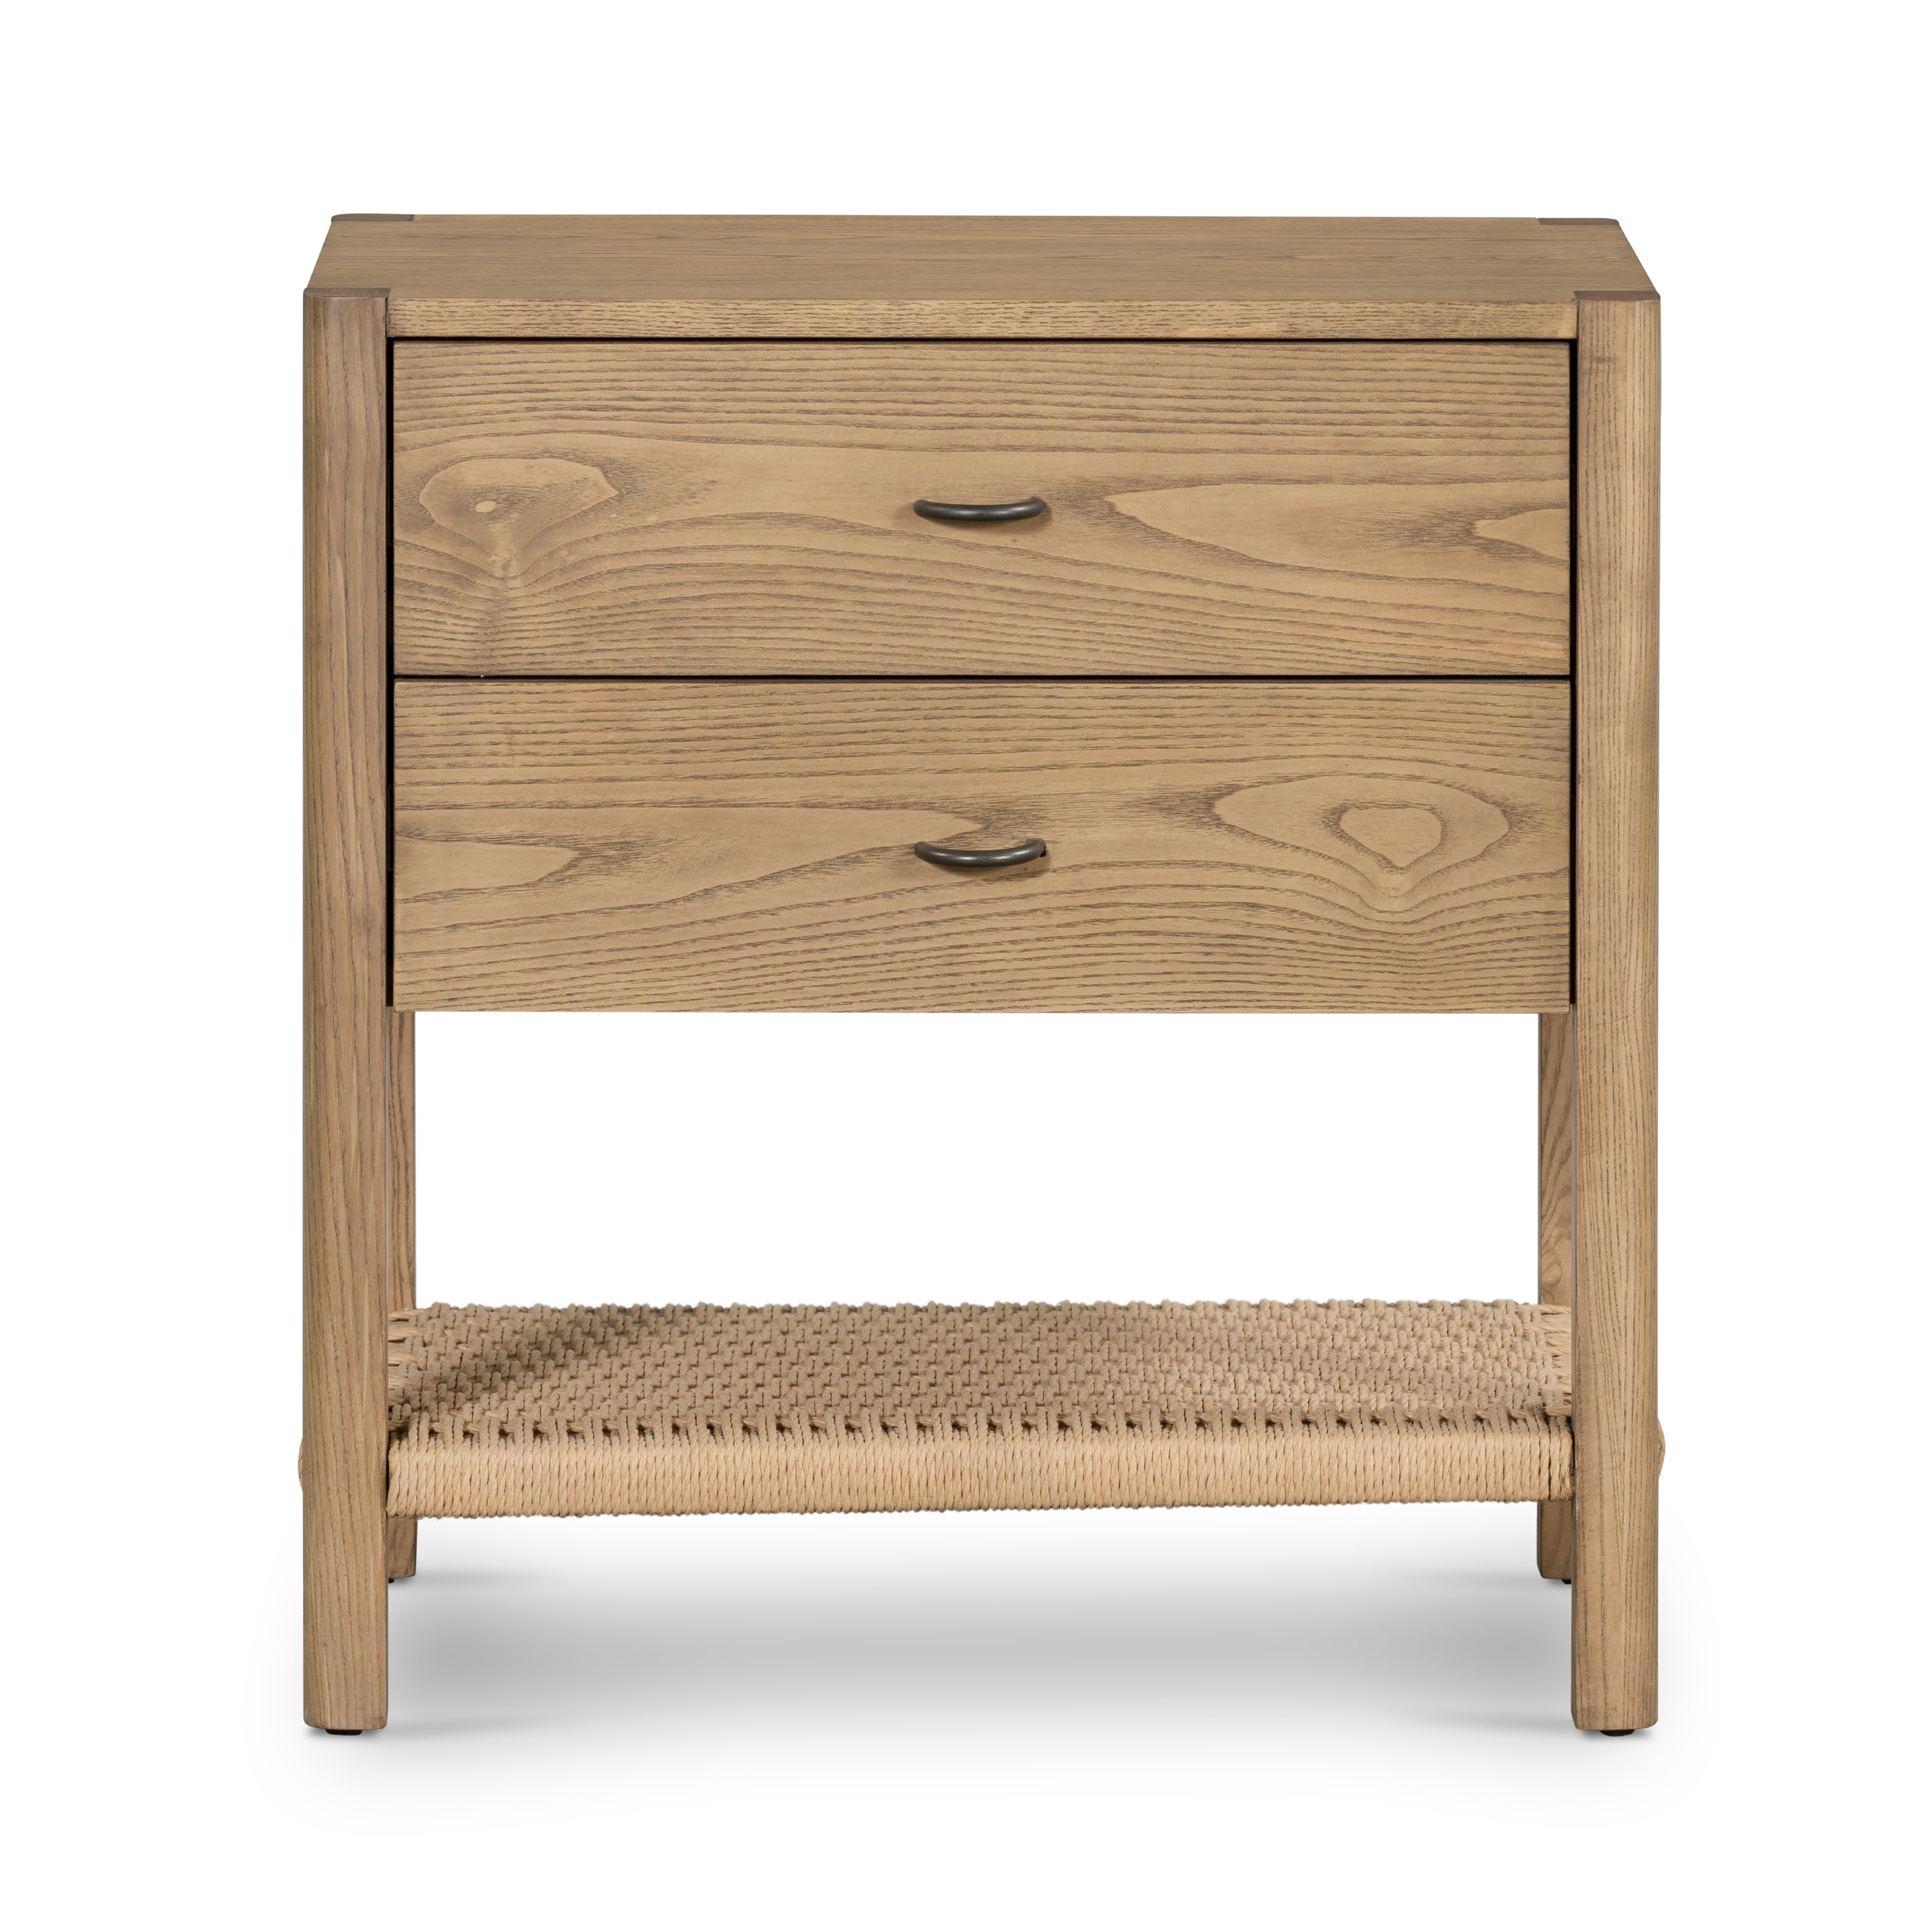 Simple yet refined, a Danish design-influenced nightstand is made from solid ash, with iron hardware finished in a sleek gunmetal. Dual drawers bring generous storage space to the bedside, while stretcher-style shelving made from woven paper cord doles a textural finishing touch.